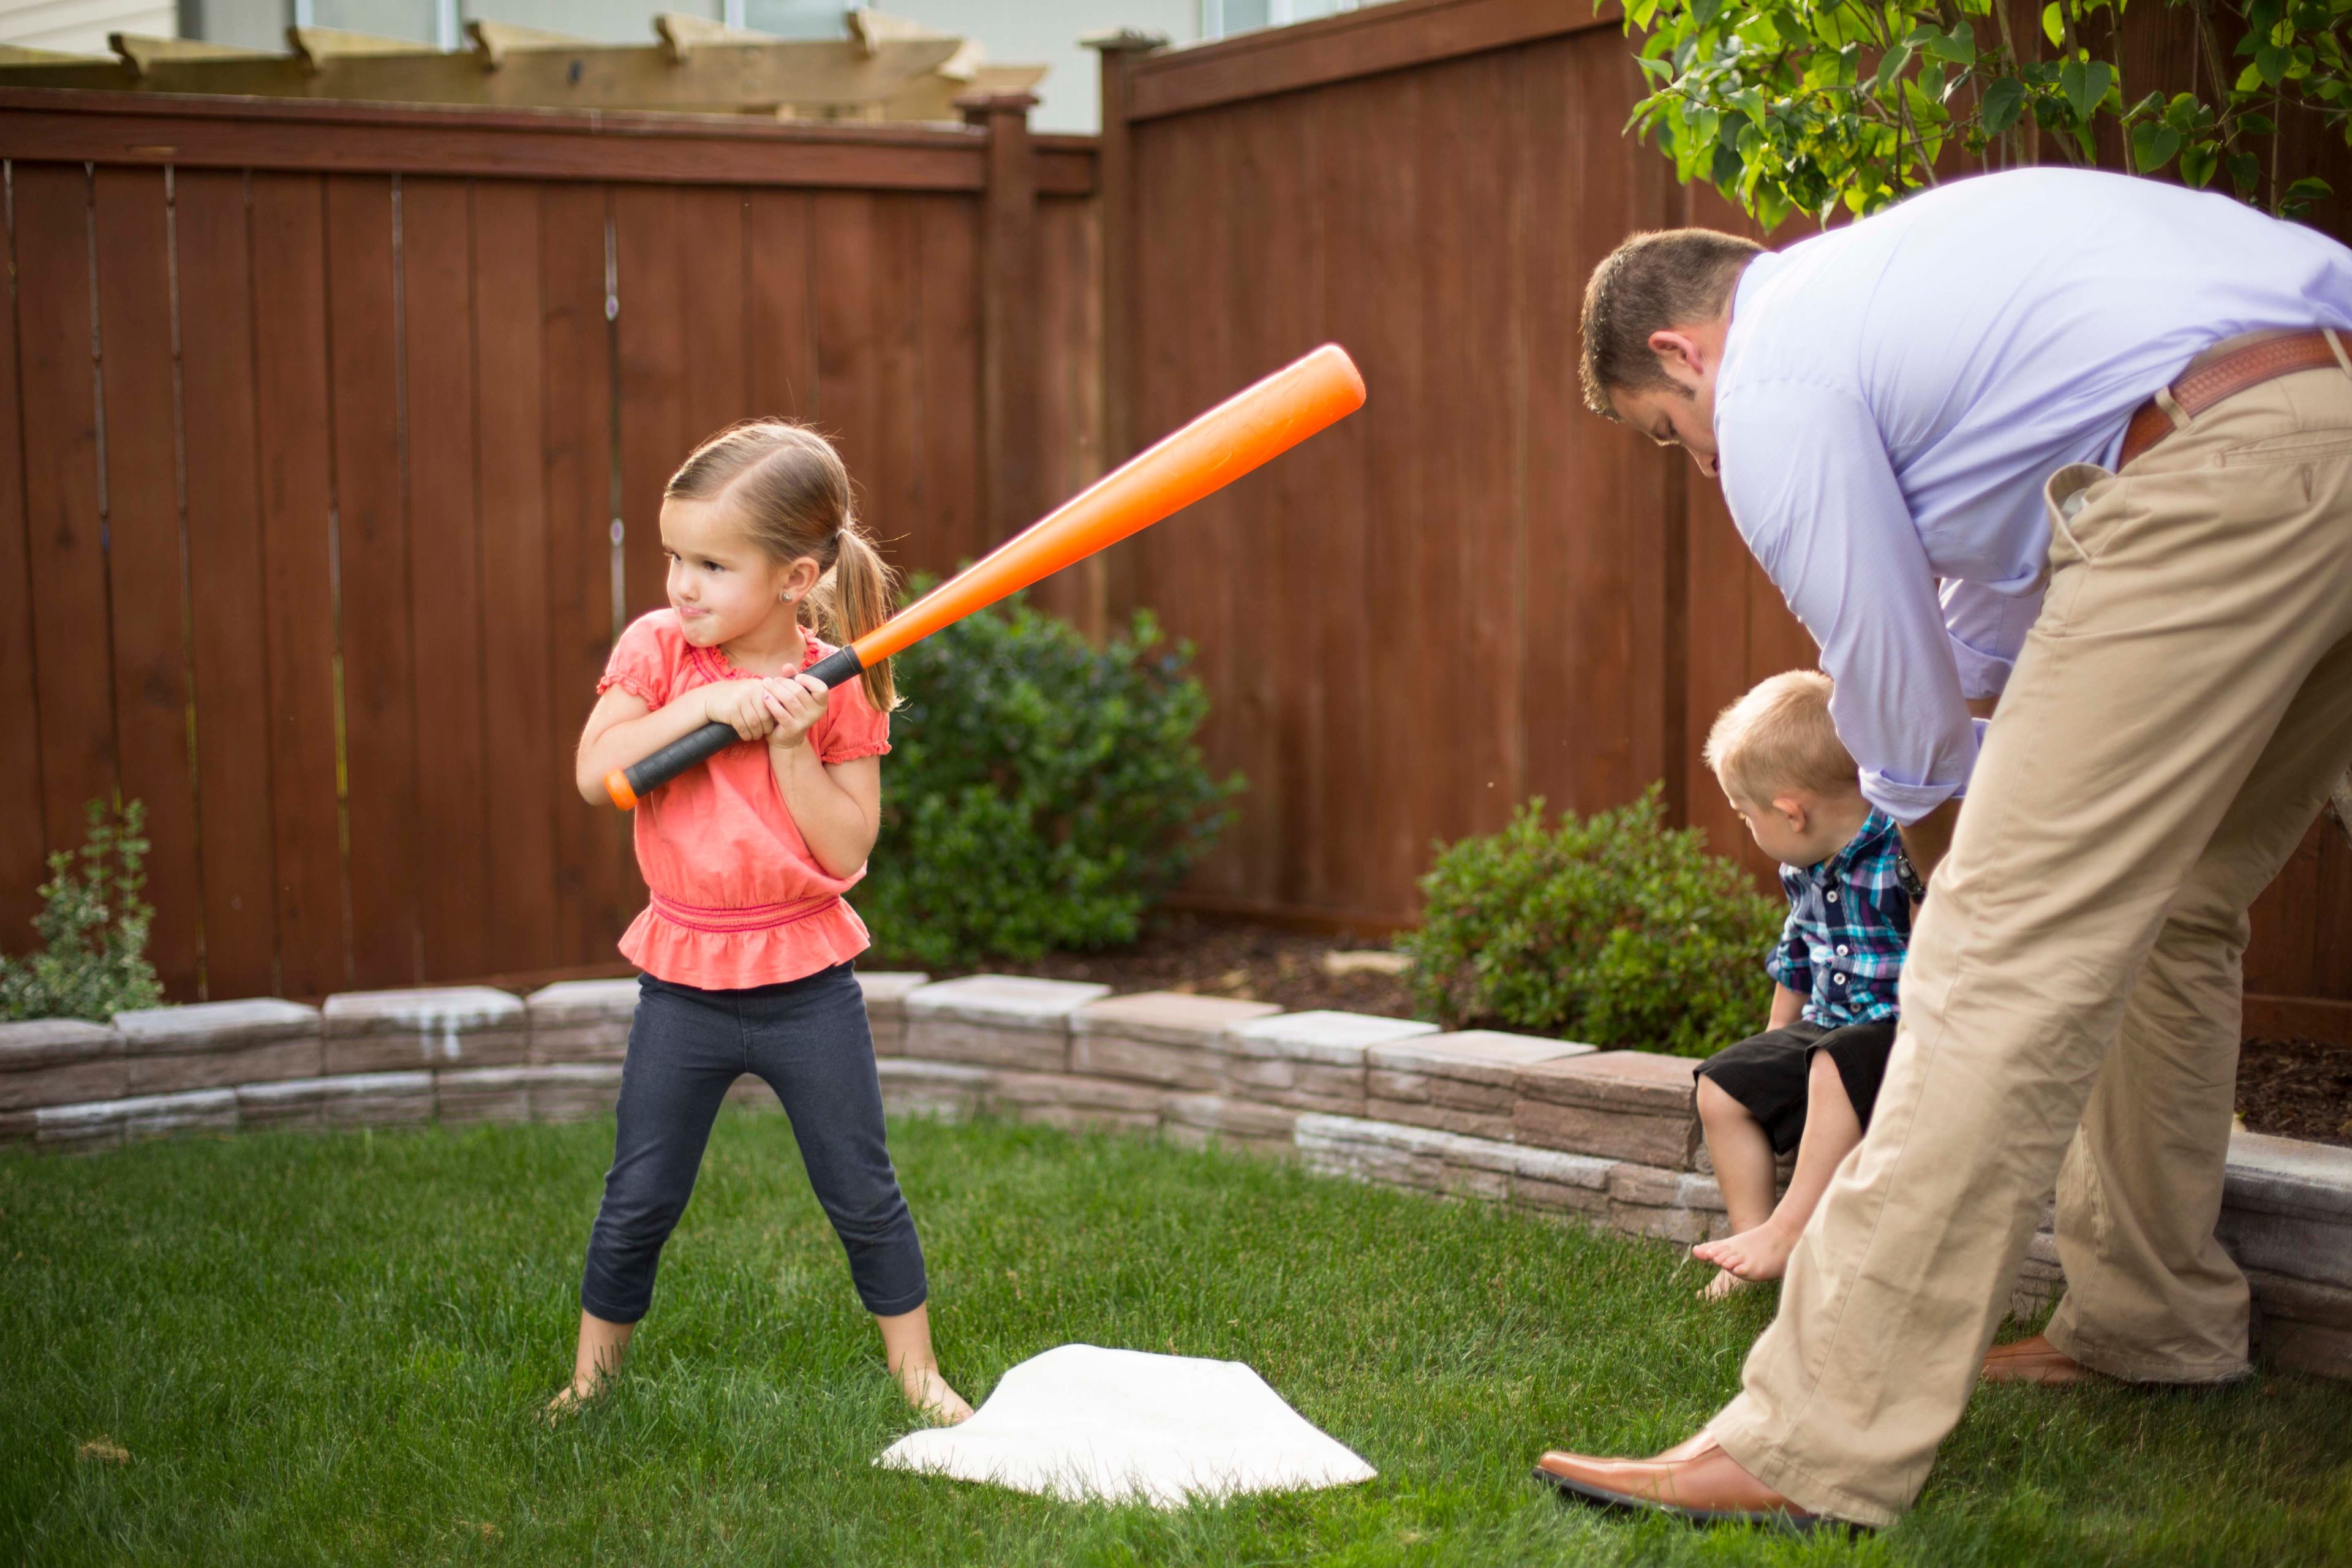 A young girl prepares to bat while playing baseball with her family.  